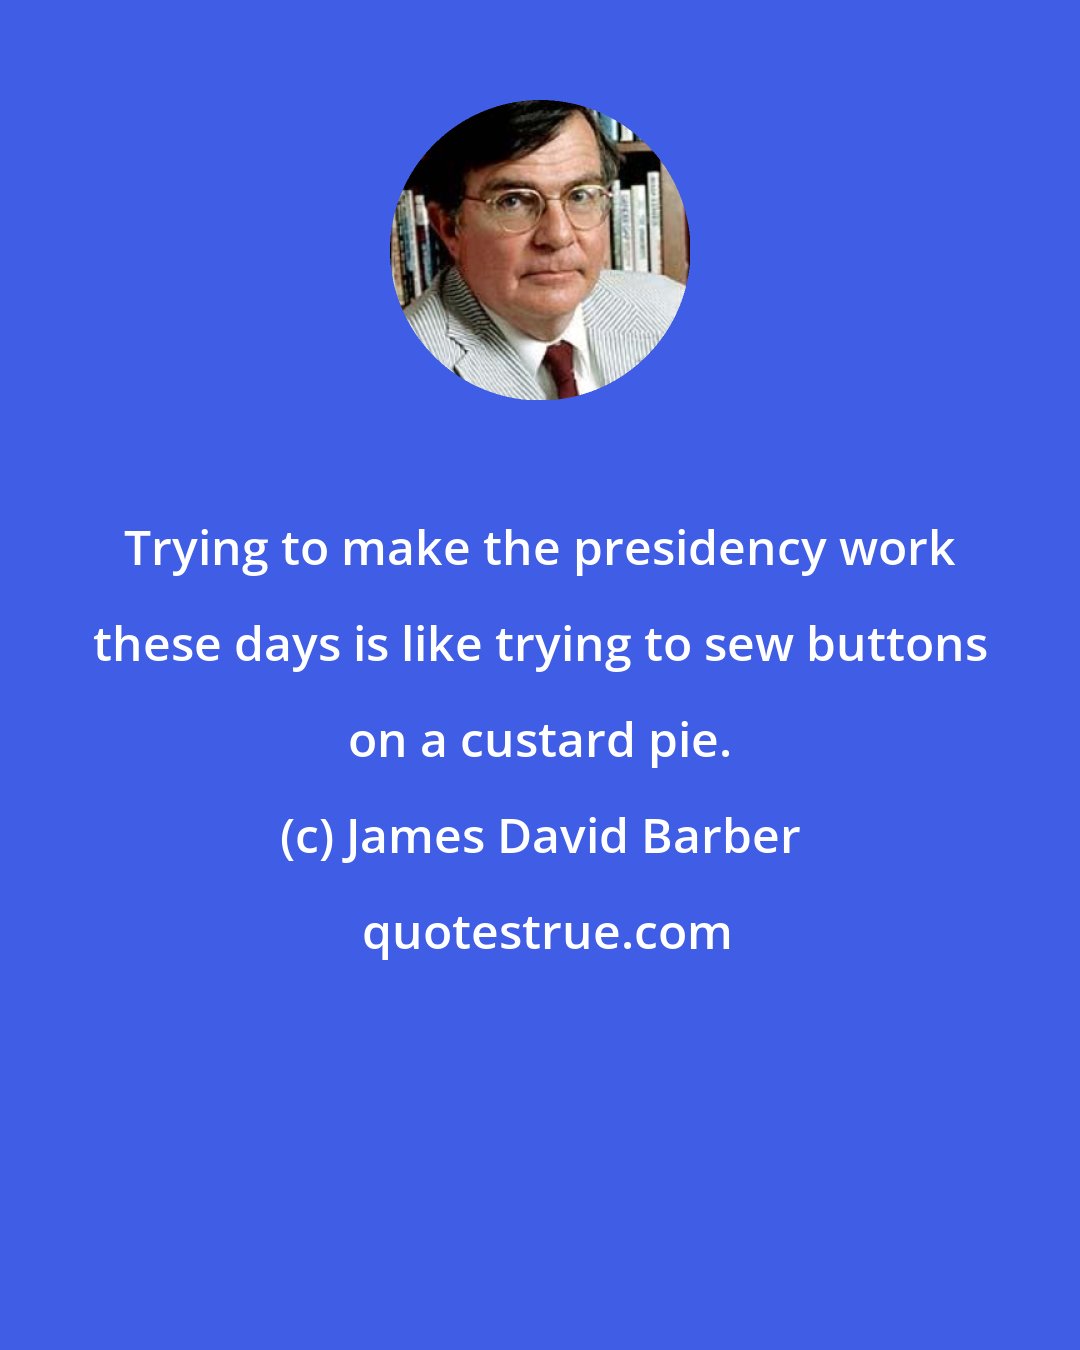 James David Barber: Trying to make the presidency work these days is like trying to sew buttons on a custard pie.